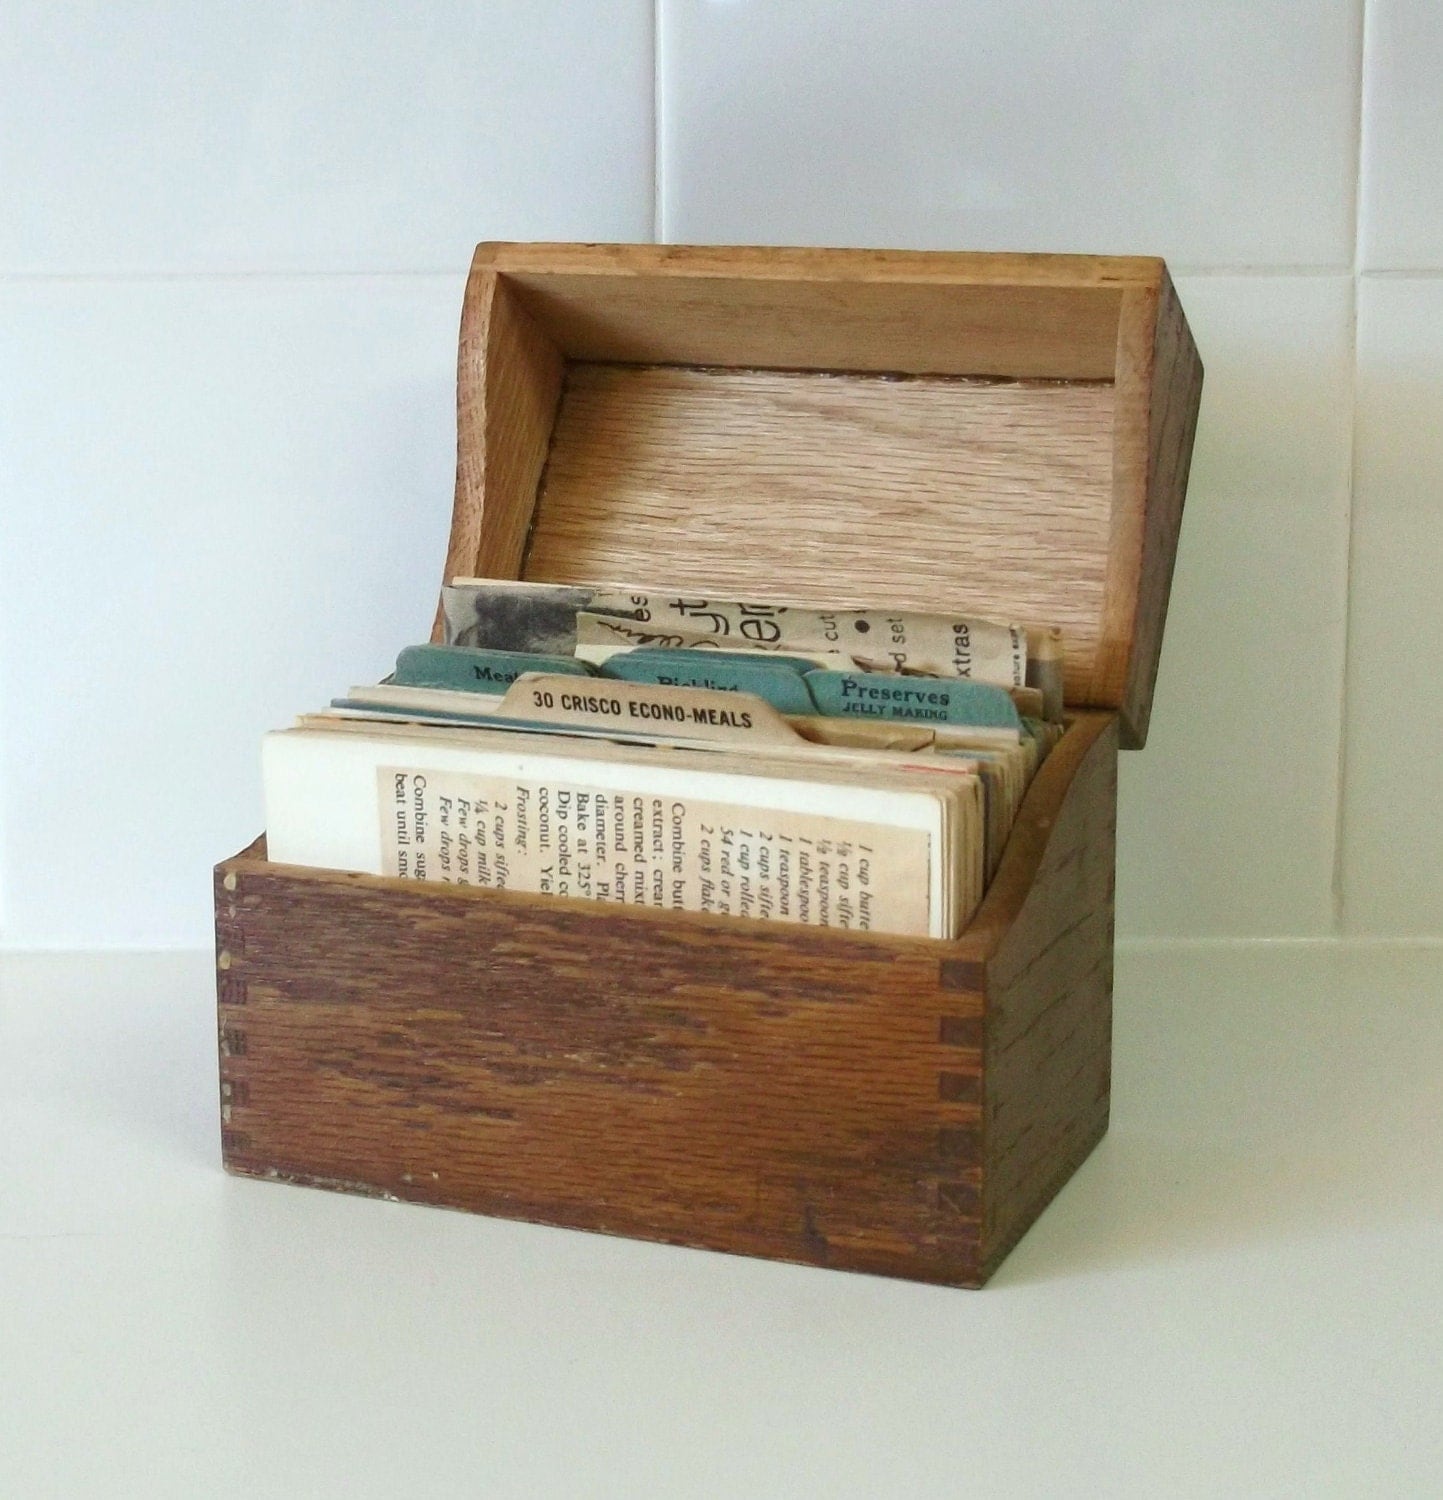 Wooden Recipe Box with Vintage Recipe Cards